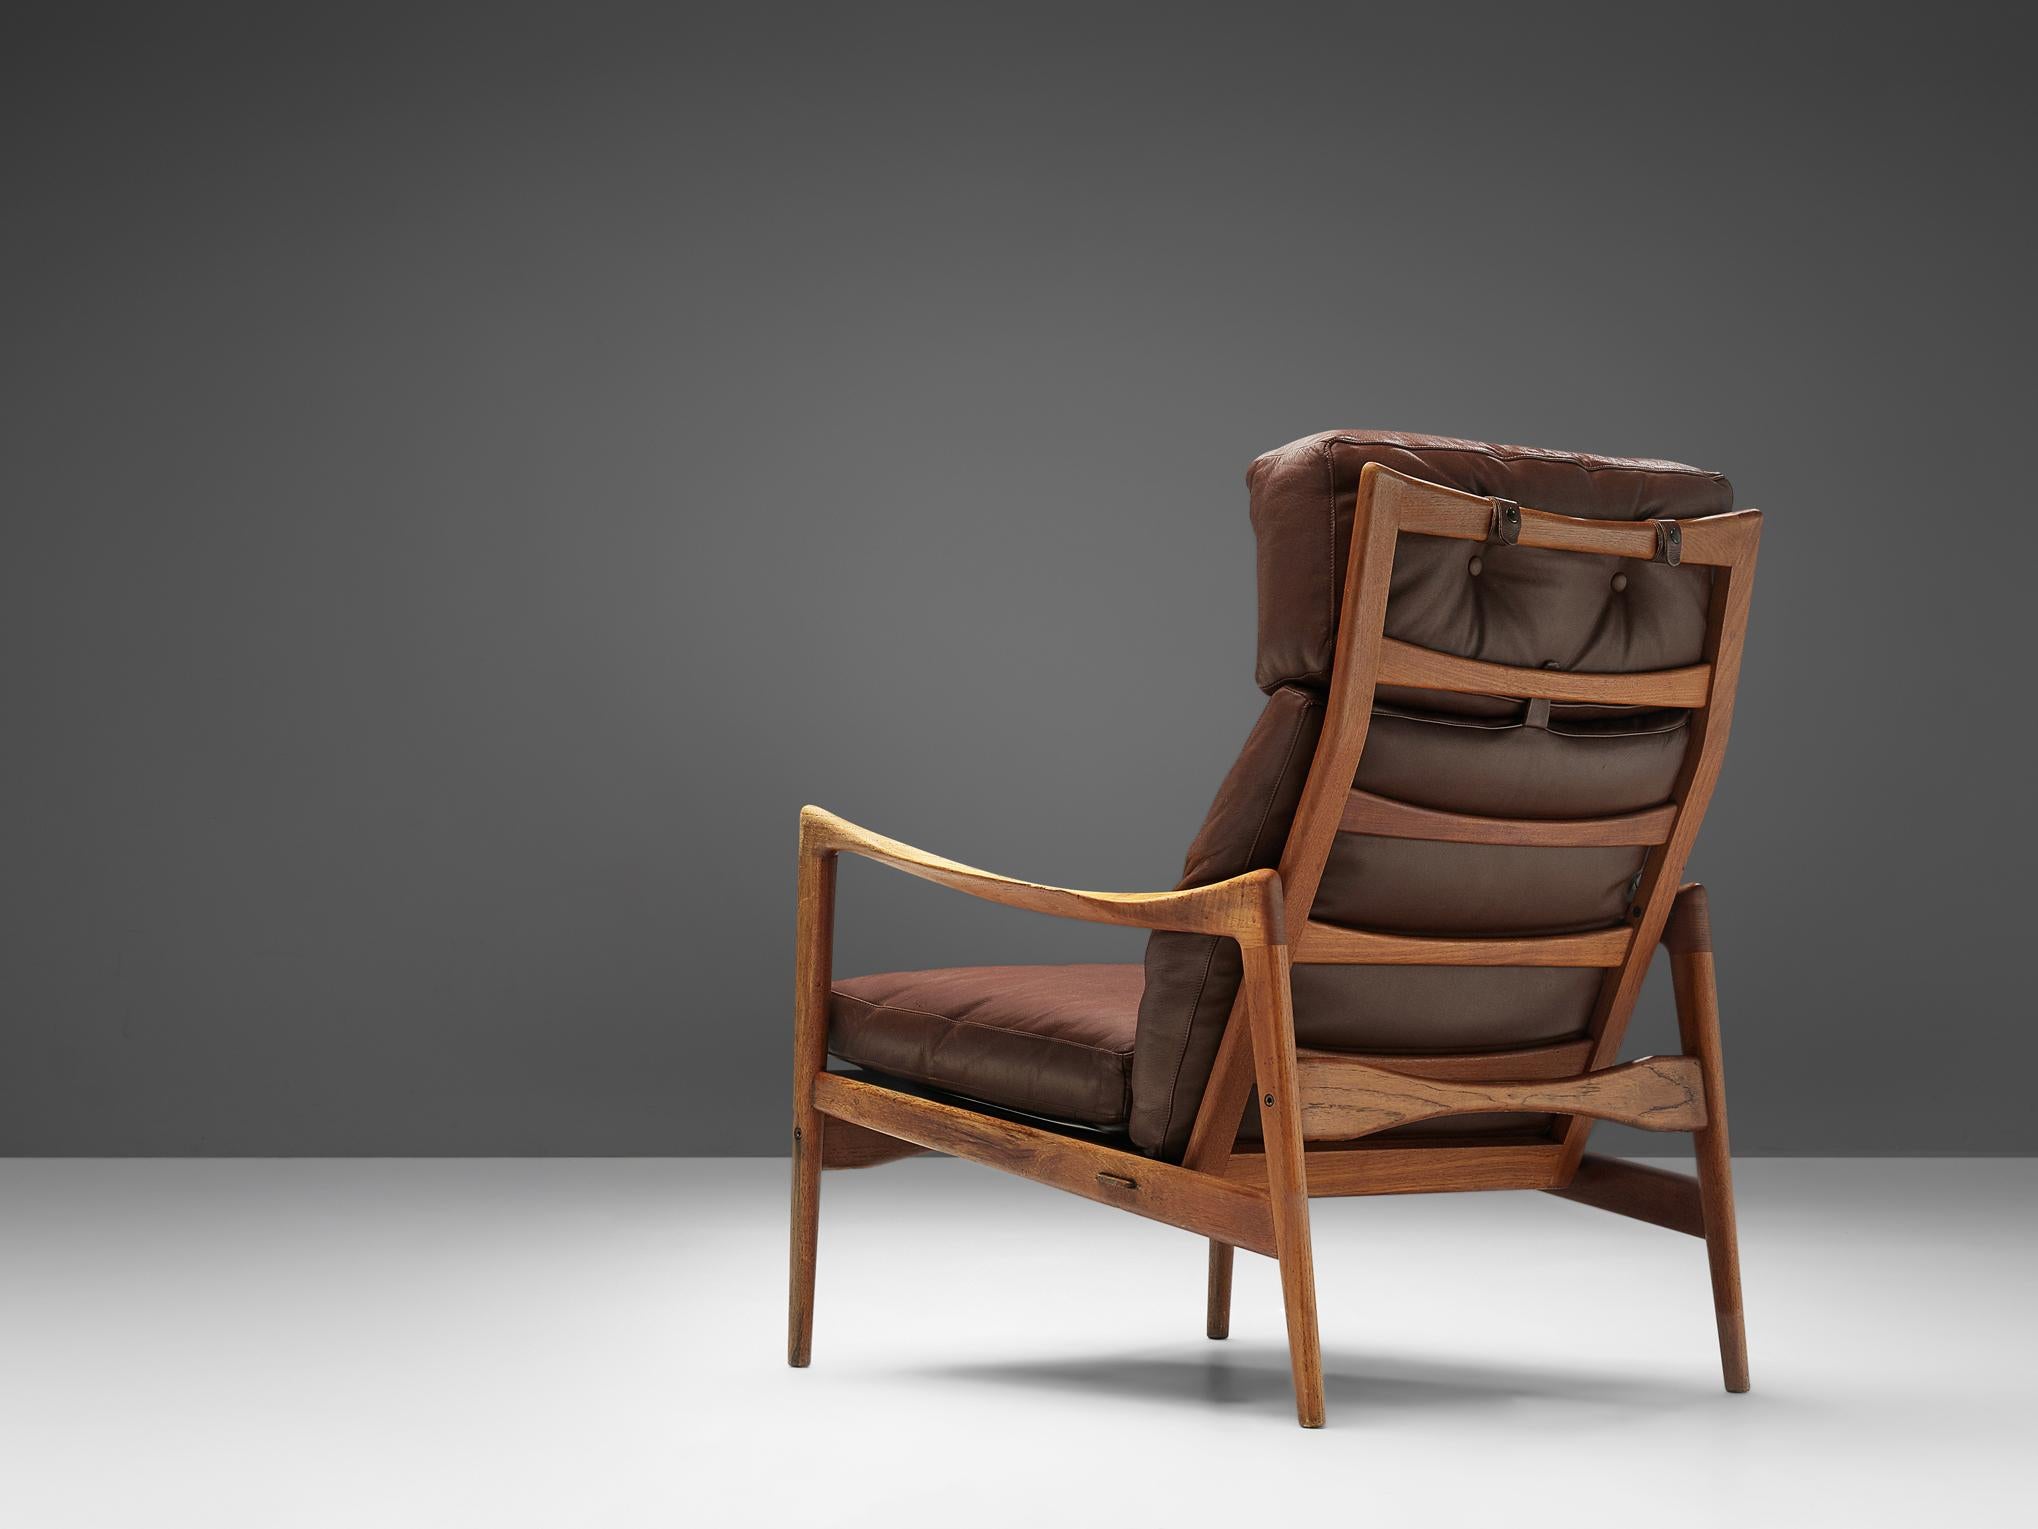 Ib Kofod-Larsen for OPE Möbler, high back chair, in teak and leather, Sweden, circa 1963.

Elegant high back armchair in teak and brown leather upholstery. The frame shows the great skills of Ib Kofod-Larsen. Overall, the chair has graceful lines